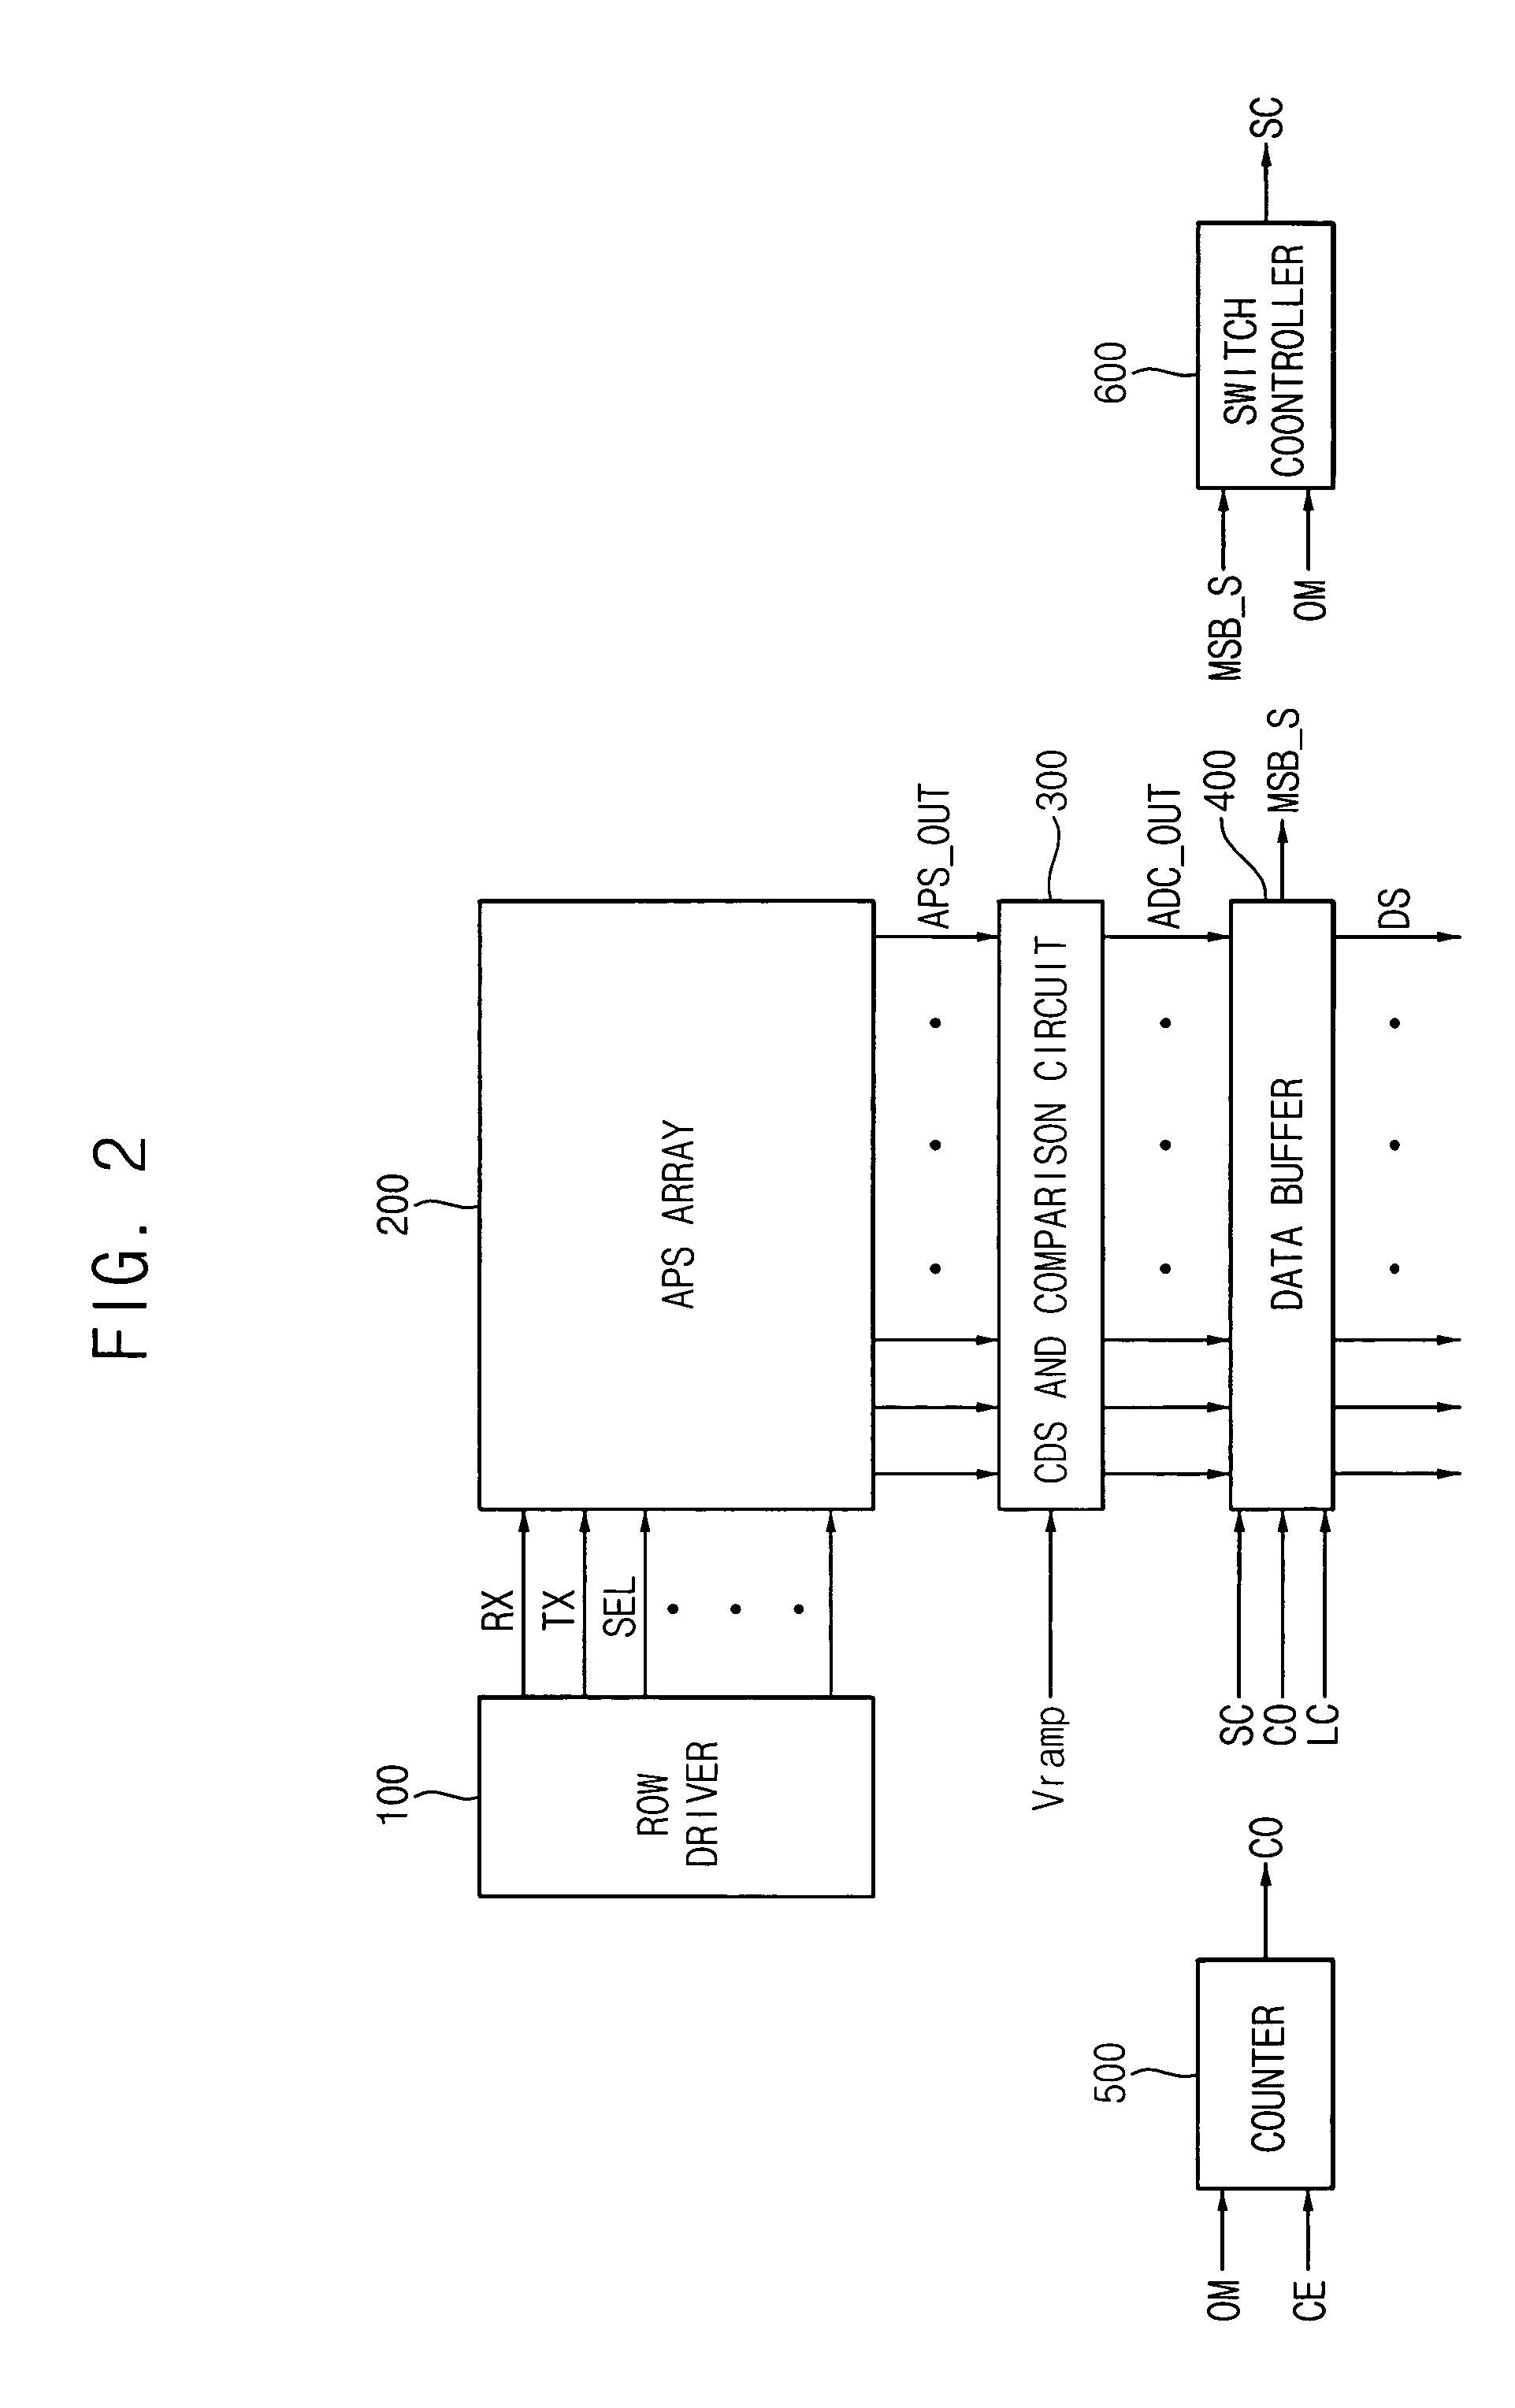 Column analog-to-digital conversion apparatus and method supporting a high frame rate in a sub-sampling mode